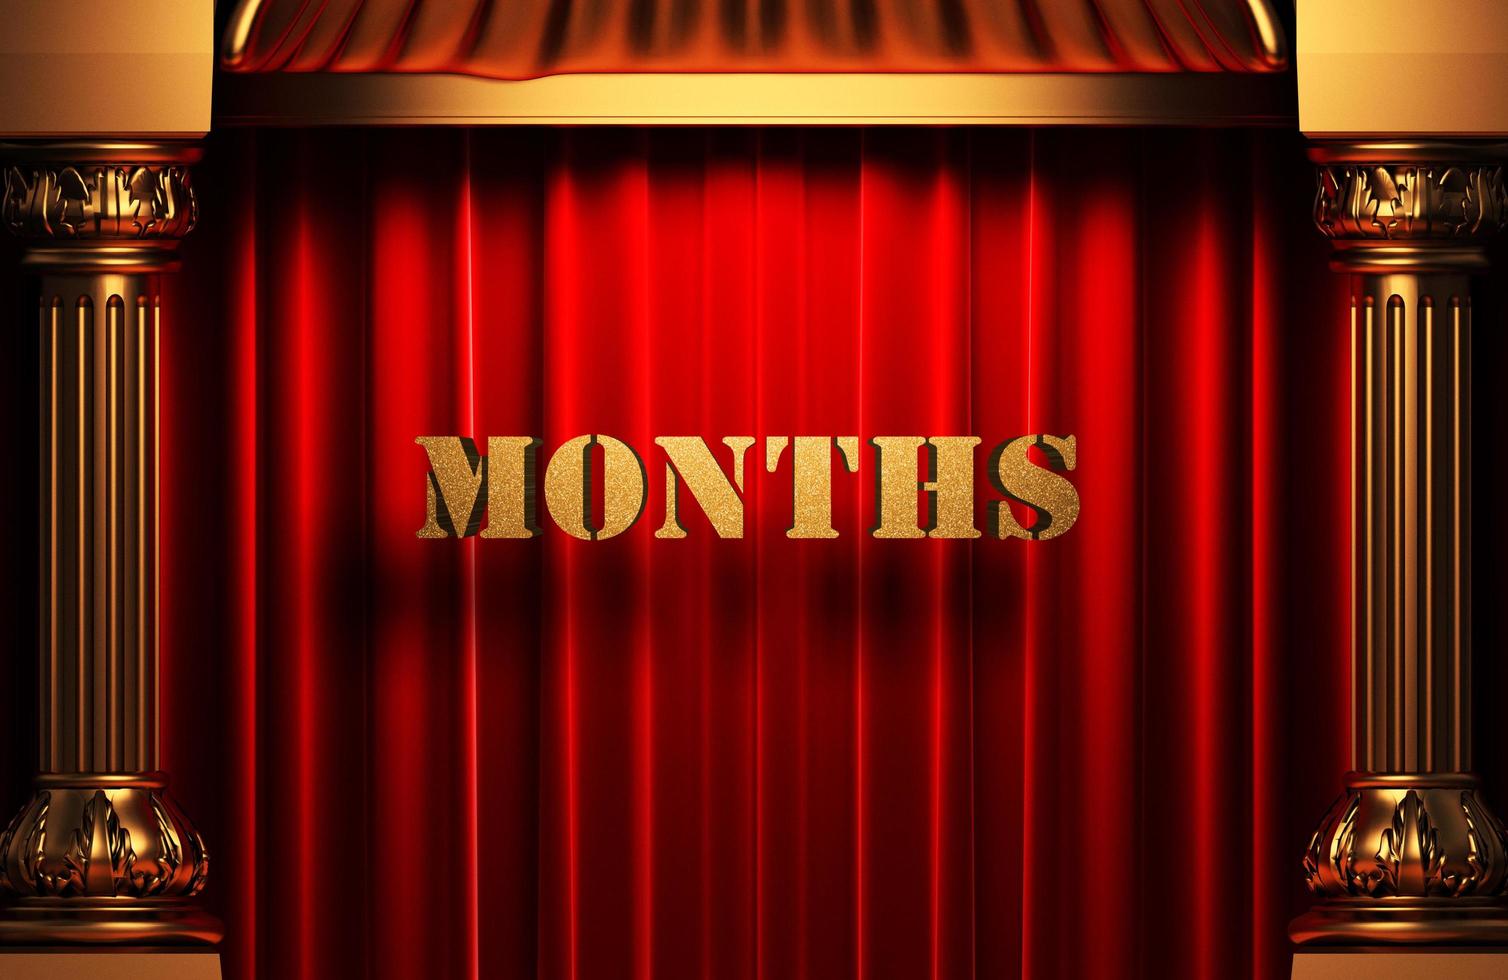 months golden word on red curtain photo